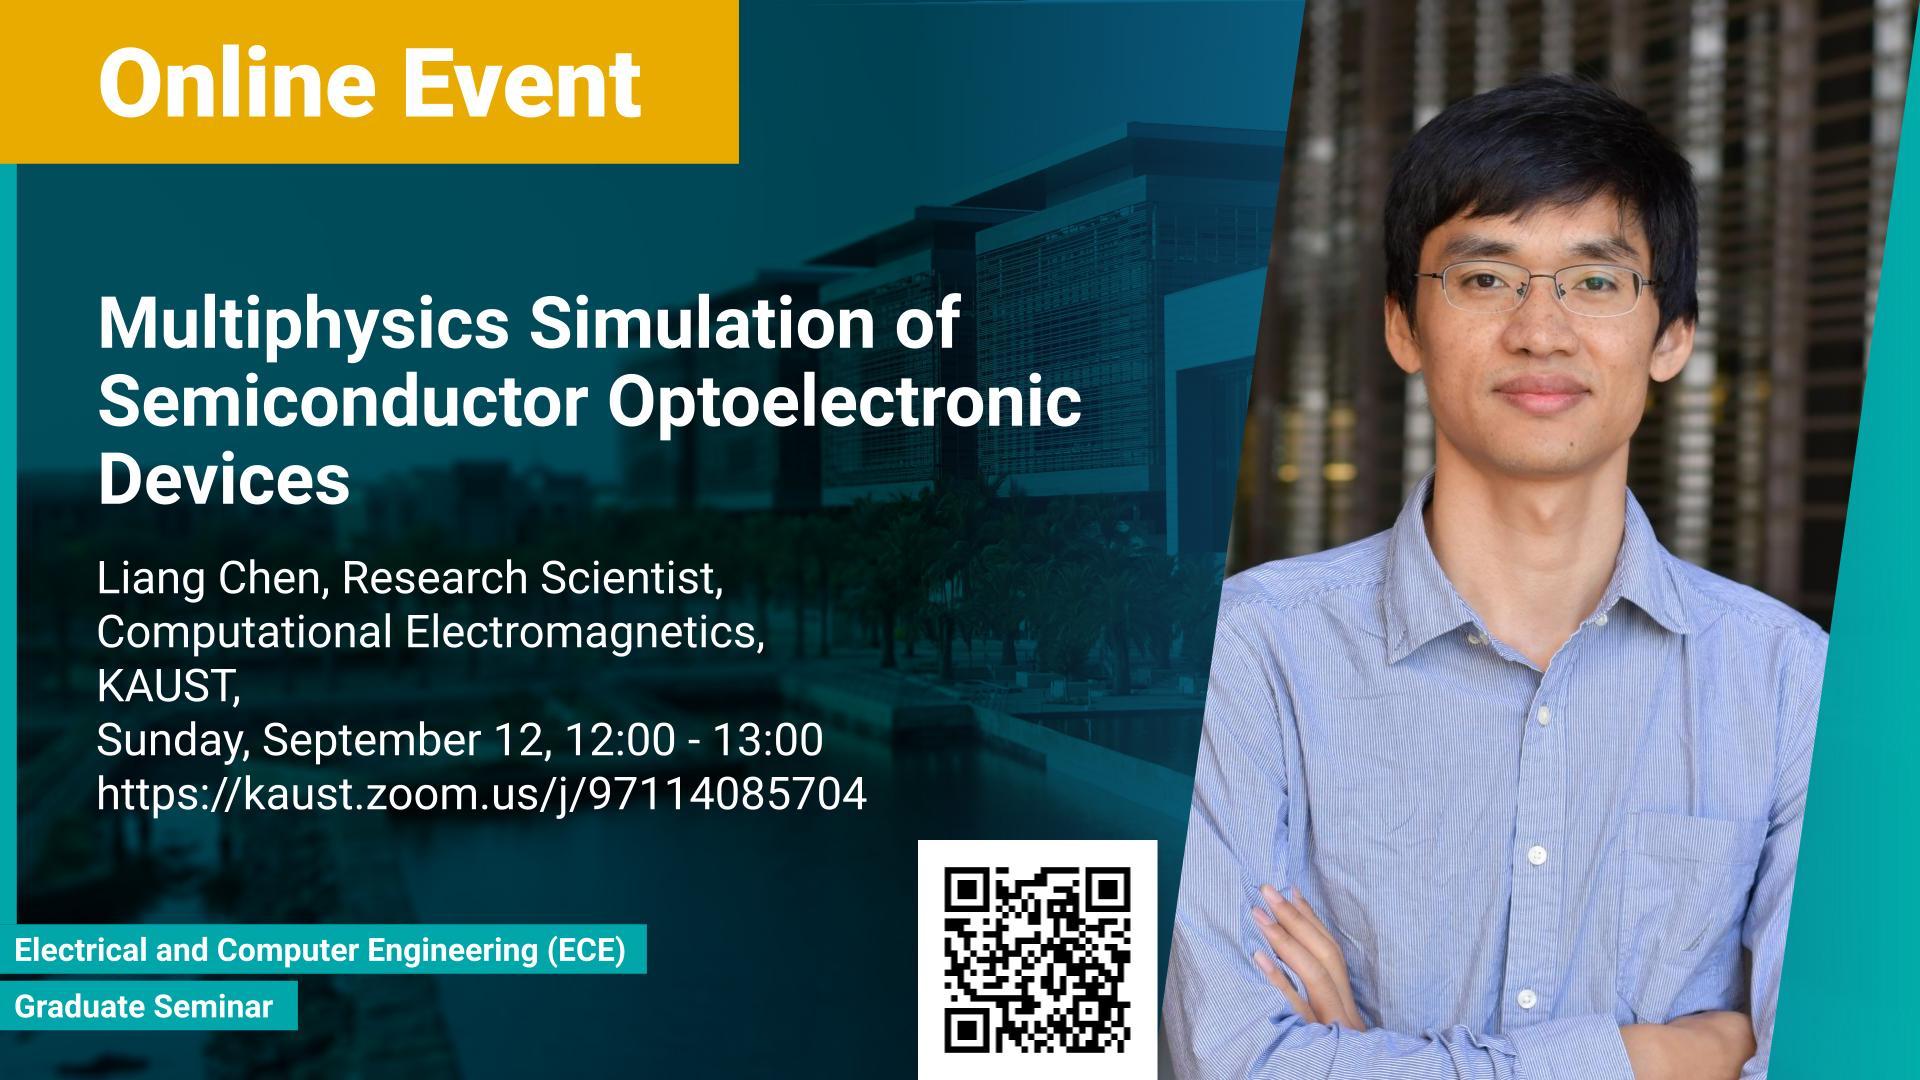 KAUST CEMSE ECE Graduate Seminar Liang Chen Multiphysics Simulation of Semiconductor Optoelectronic